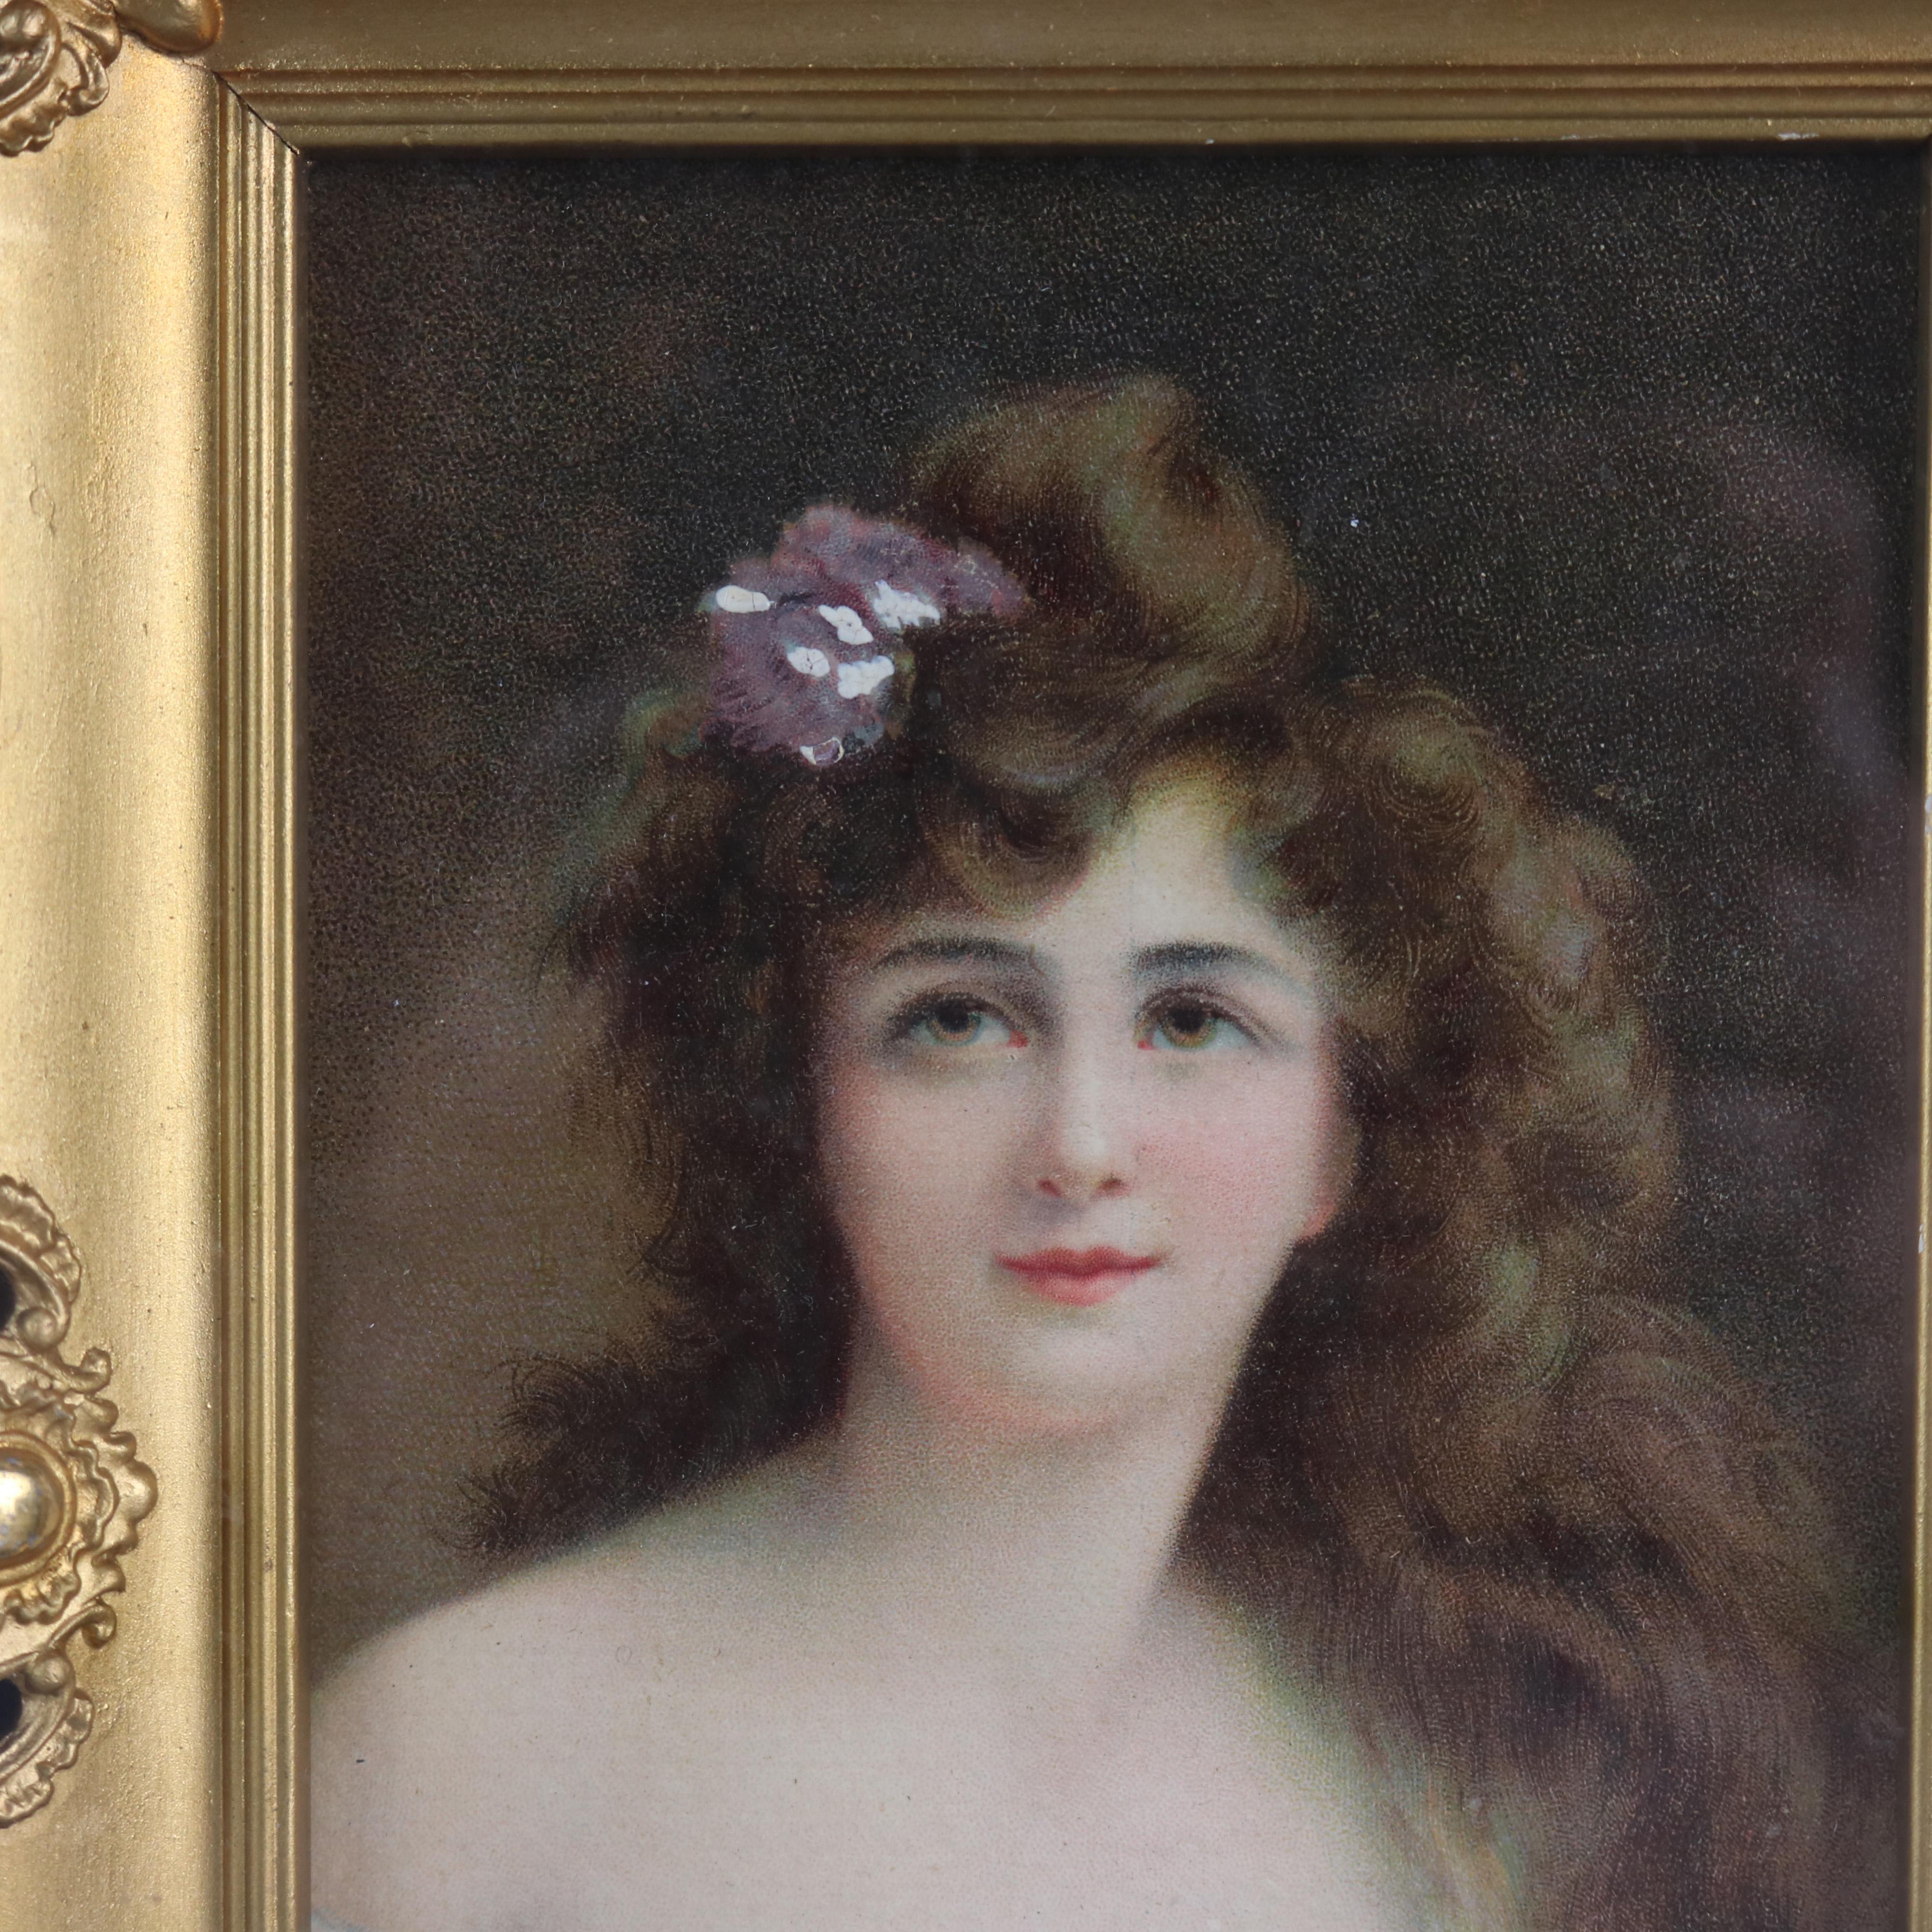 An antique Victorian oil on canvas painting by Asti depicts portrait of a young woman with a flower in her long hair, artist signed lower left Asti, seated in ornate ebonized and giltwood shadowbox frame, c1890

Measures: 11.5